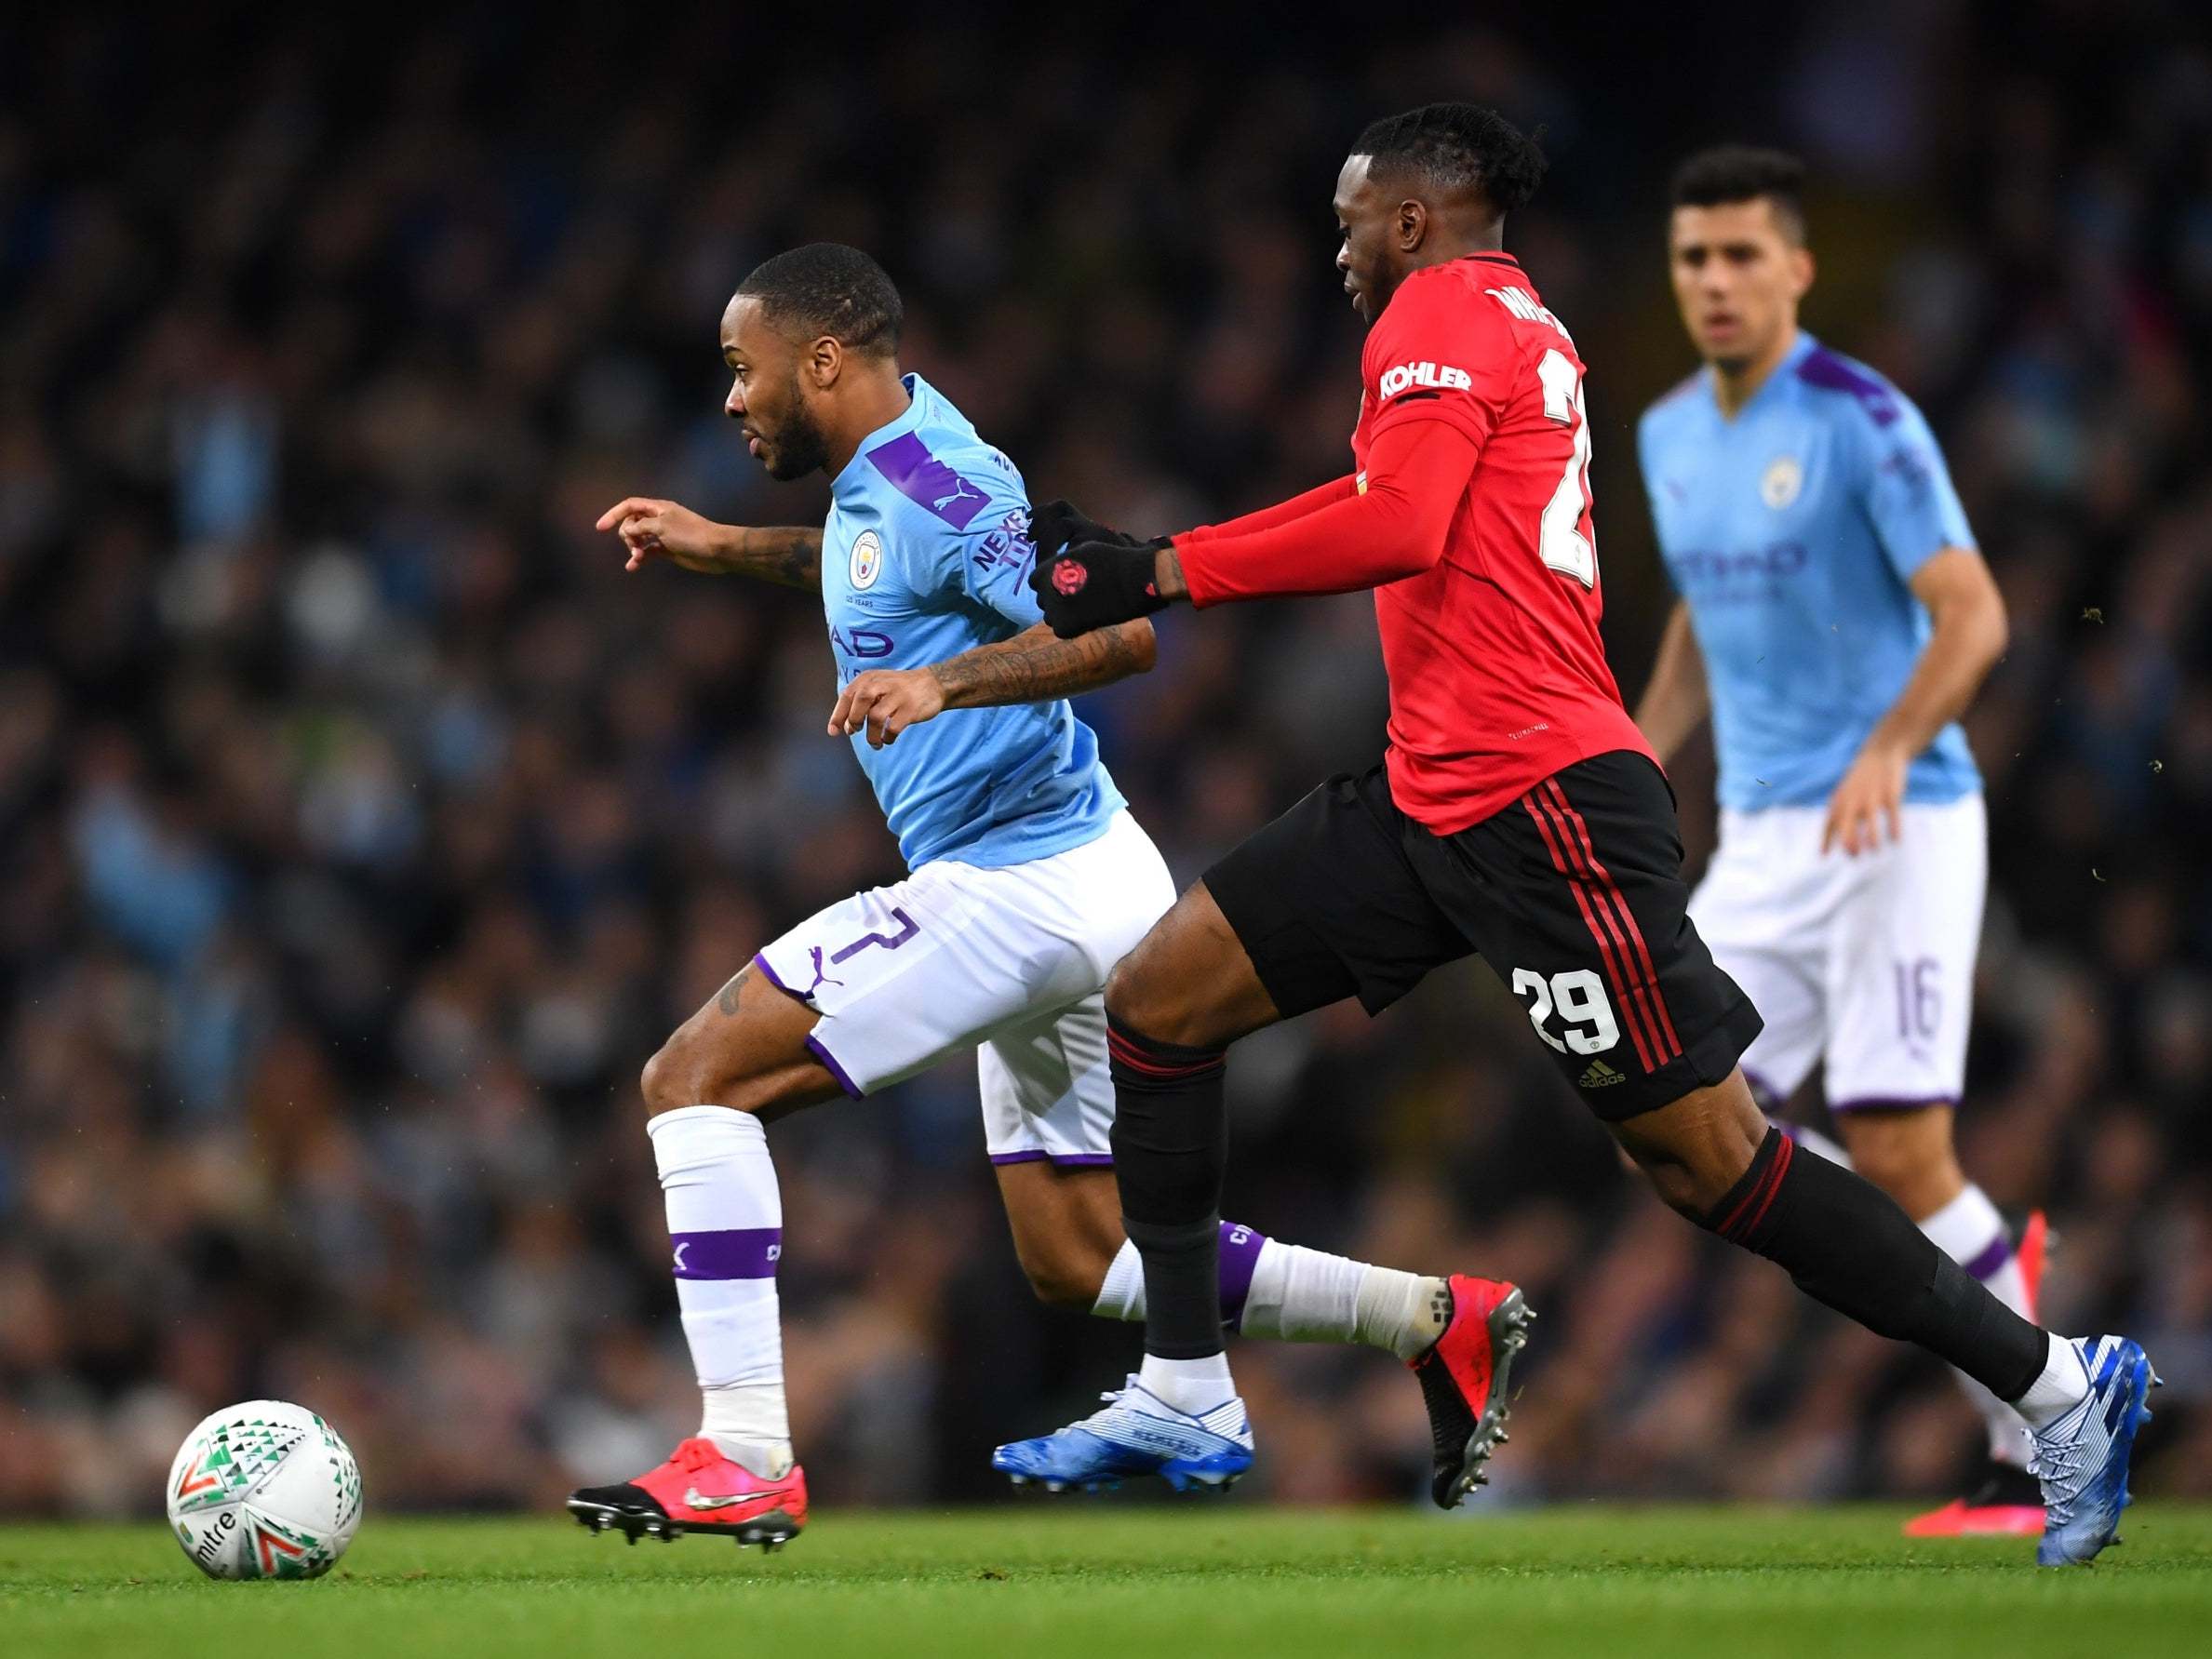 Man City vs Manchester United LIVE: Result and reaction from from Carabao Cup tonight